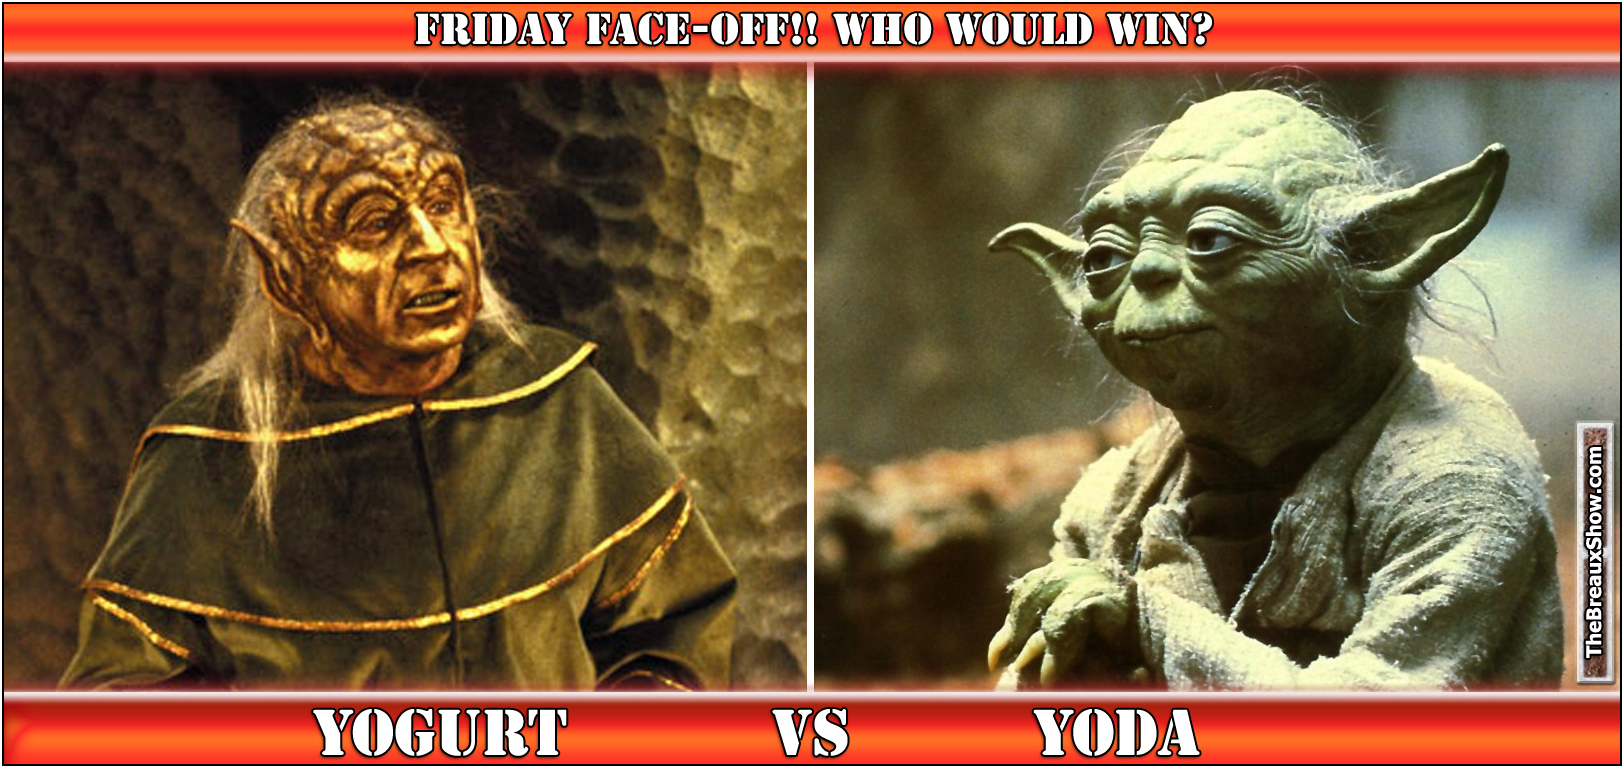 Funny Yoda Quotes On Friday. QuotesGram